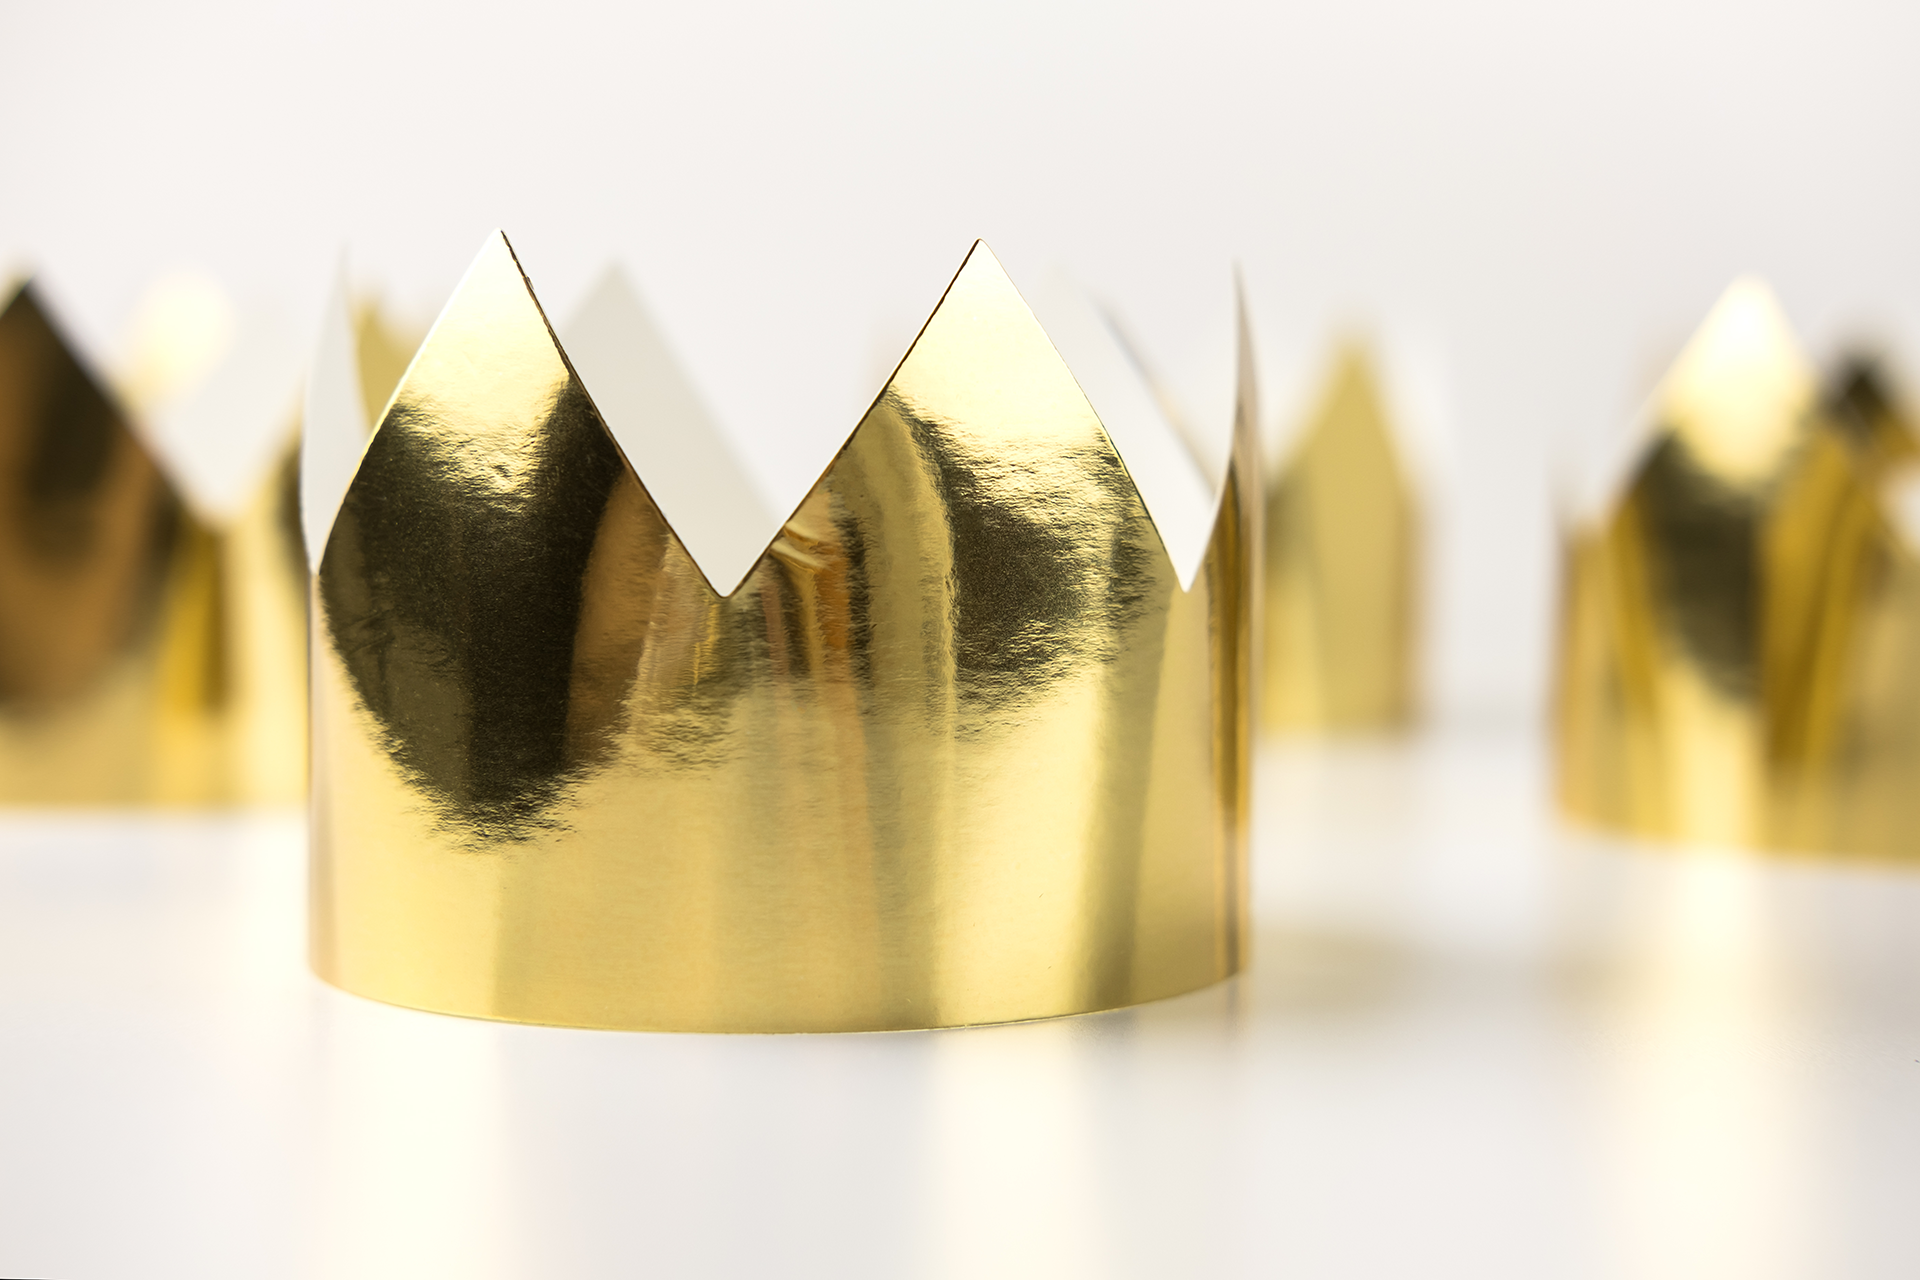 A row of shining golden paper crowns